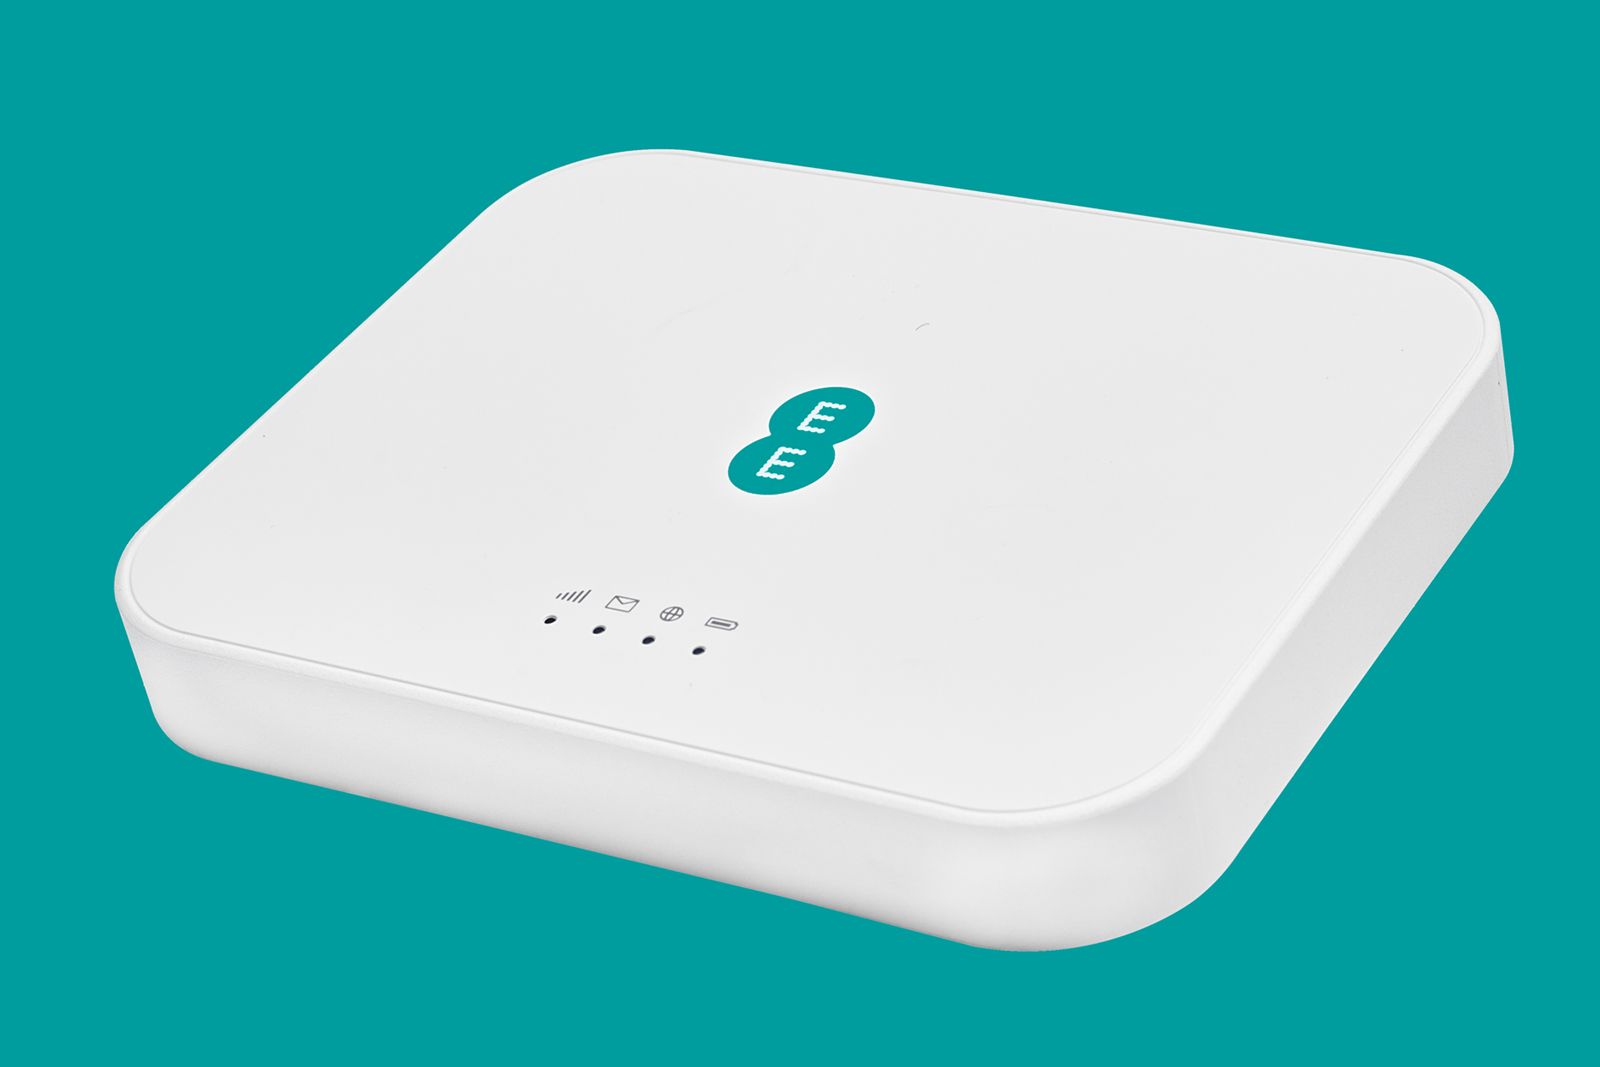 EE launches its first 5G WiFi device photo 1